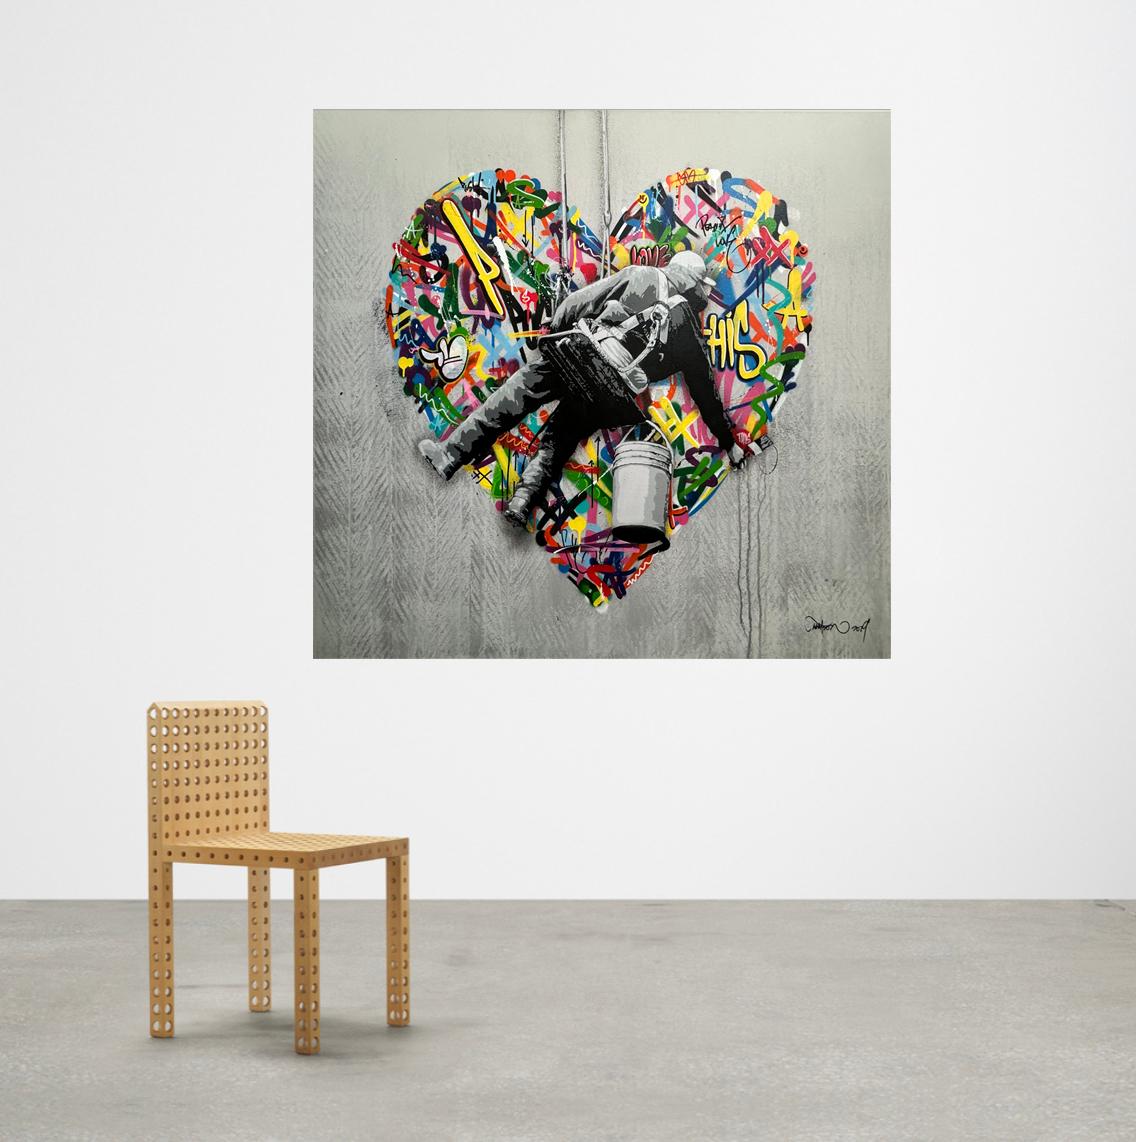 Artist:  Martin Whatson 
Title:  Make Love 
Size:  48 x 48 Inches 
Medium:  Mixed Media on Canvas
Edition:  Original 
Year:  2021
Notes: Hand Signed, Dated, Titled, and Numbered 2/2 on Verso.